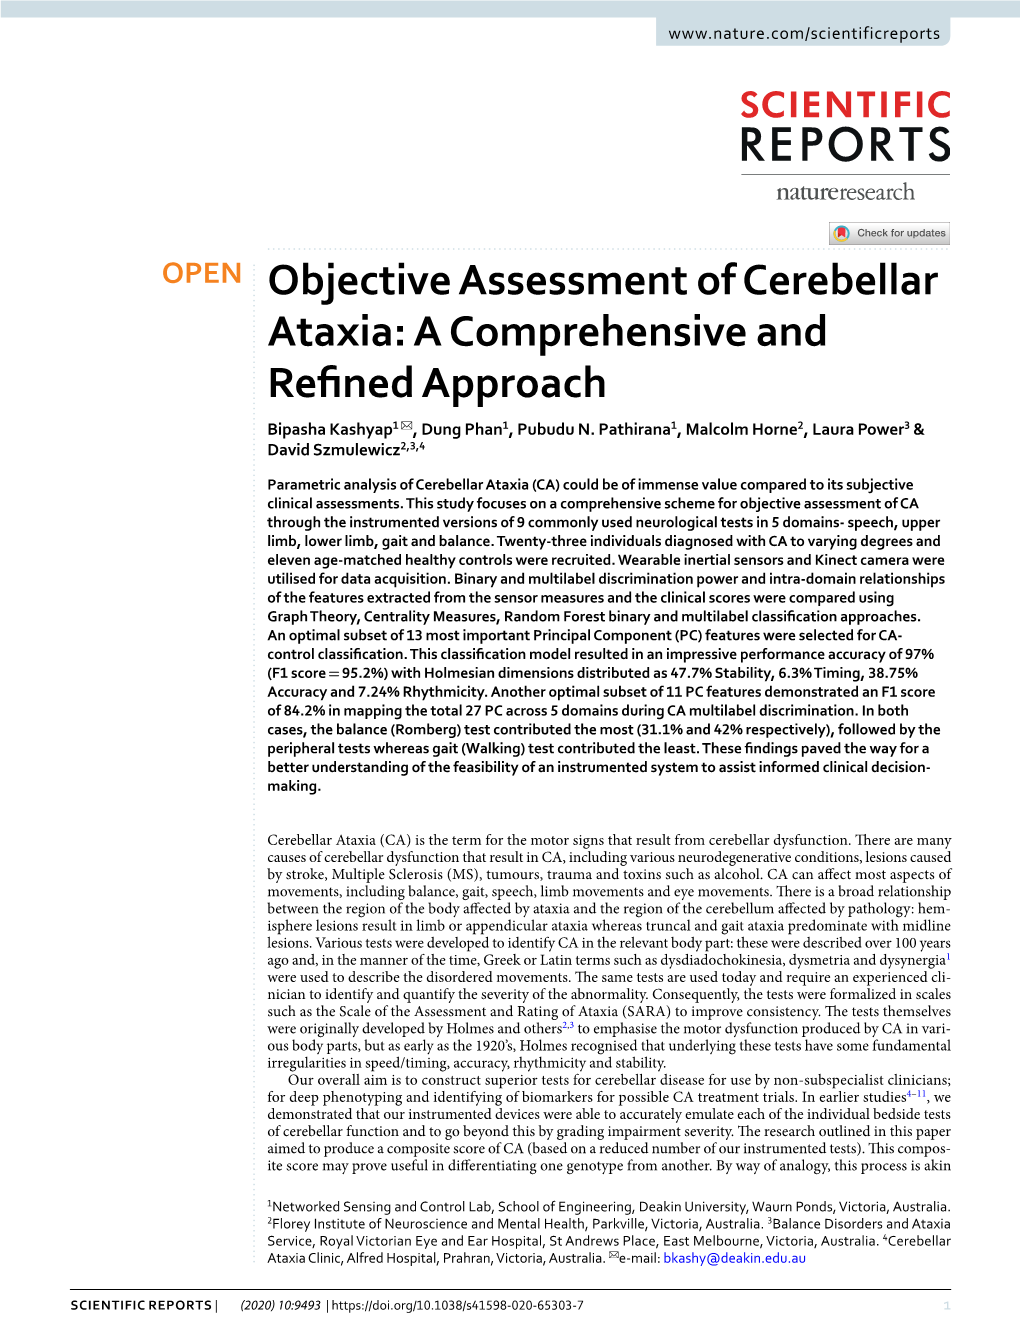 Objective Assessment of Cerebellar Ataxia: a Comprehensive and Refned Approach Bipasha Kashyap1 ✉ , Dung Phan1, Pubudu N